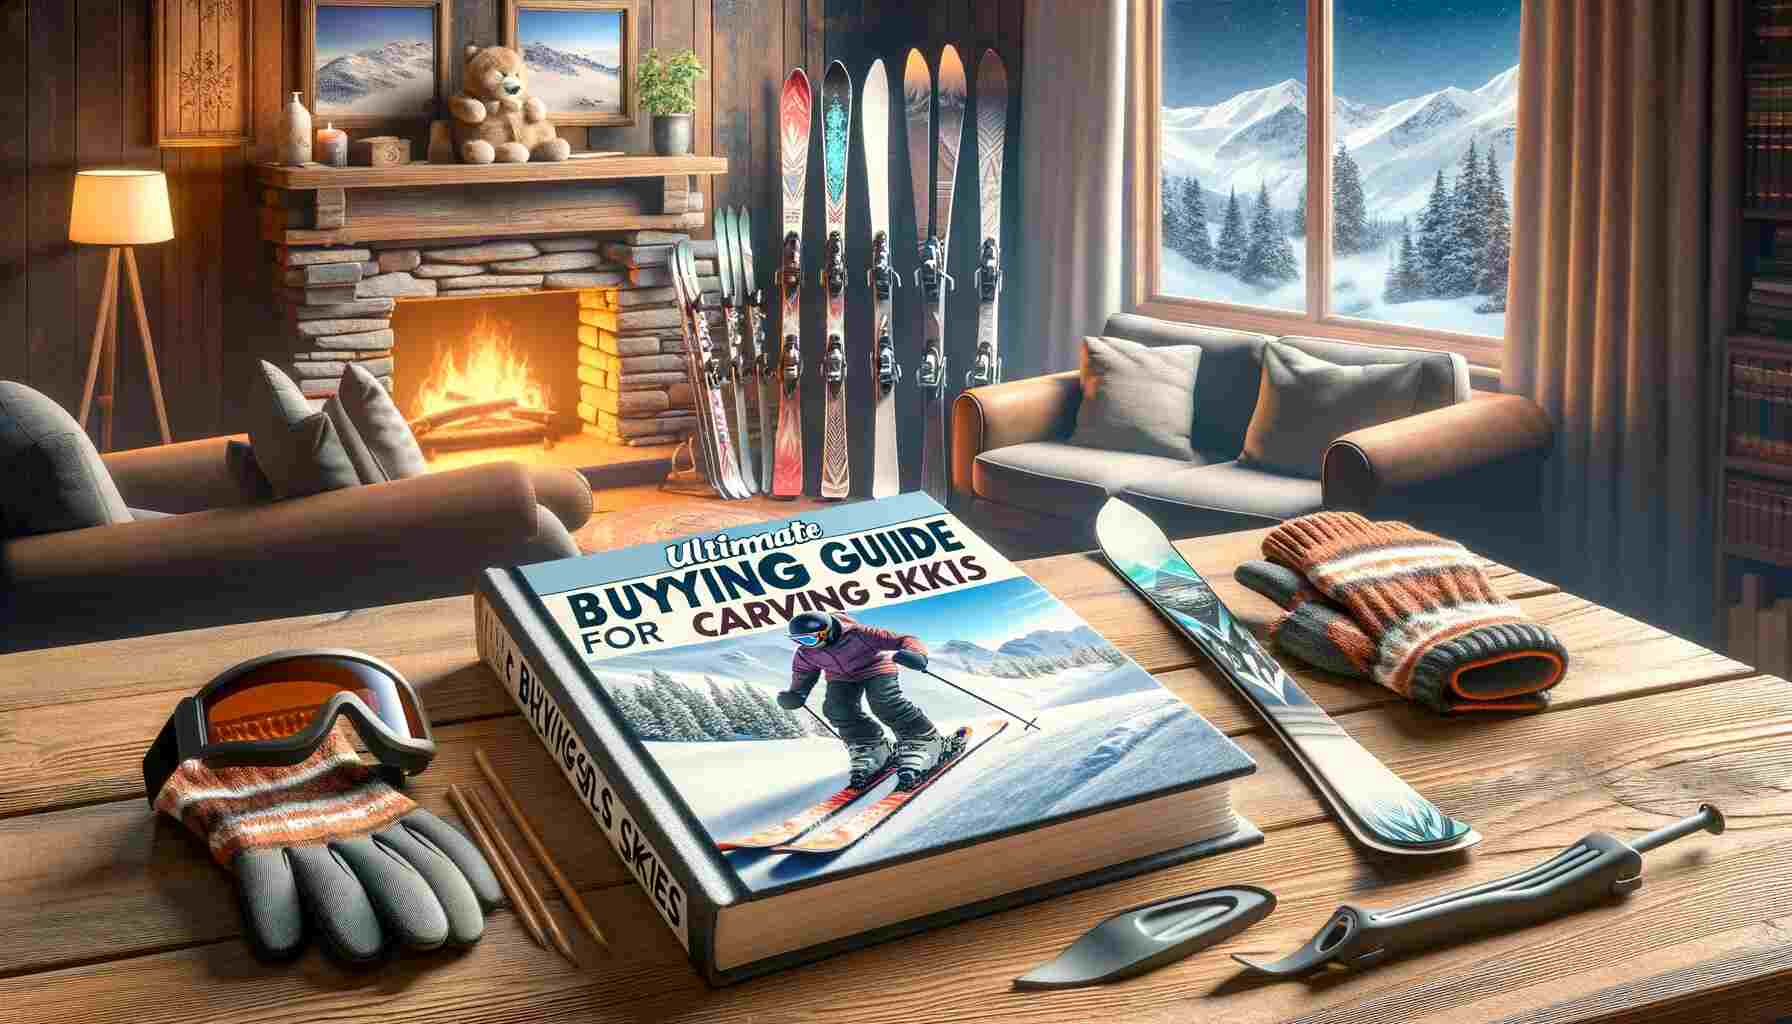 Here is the featured image for the "Ultimate Buying Guide for Carving Skis." It depicts an open book surrounded by ski gear in a cozy, ski-themed setting.